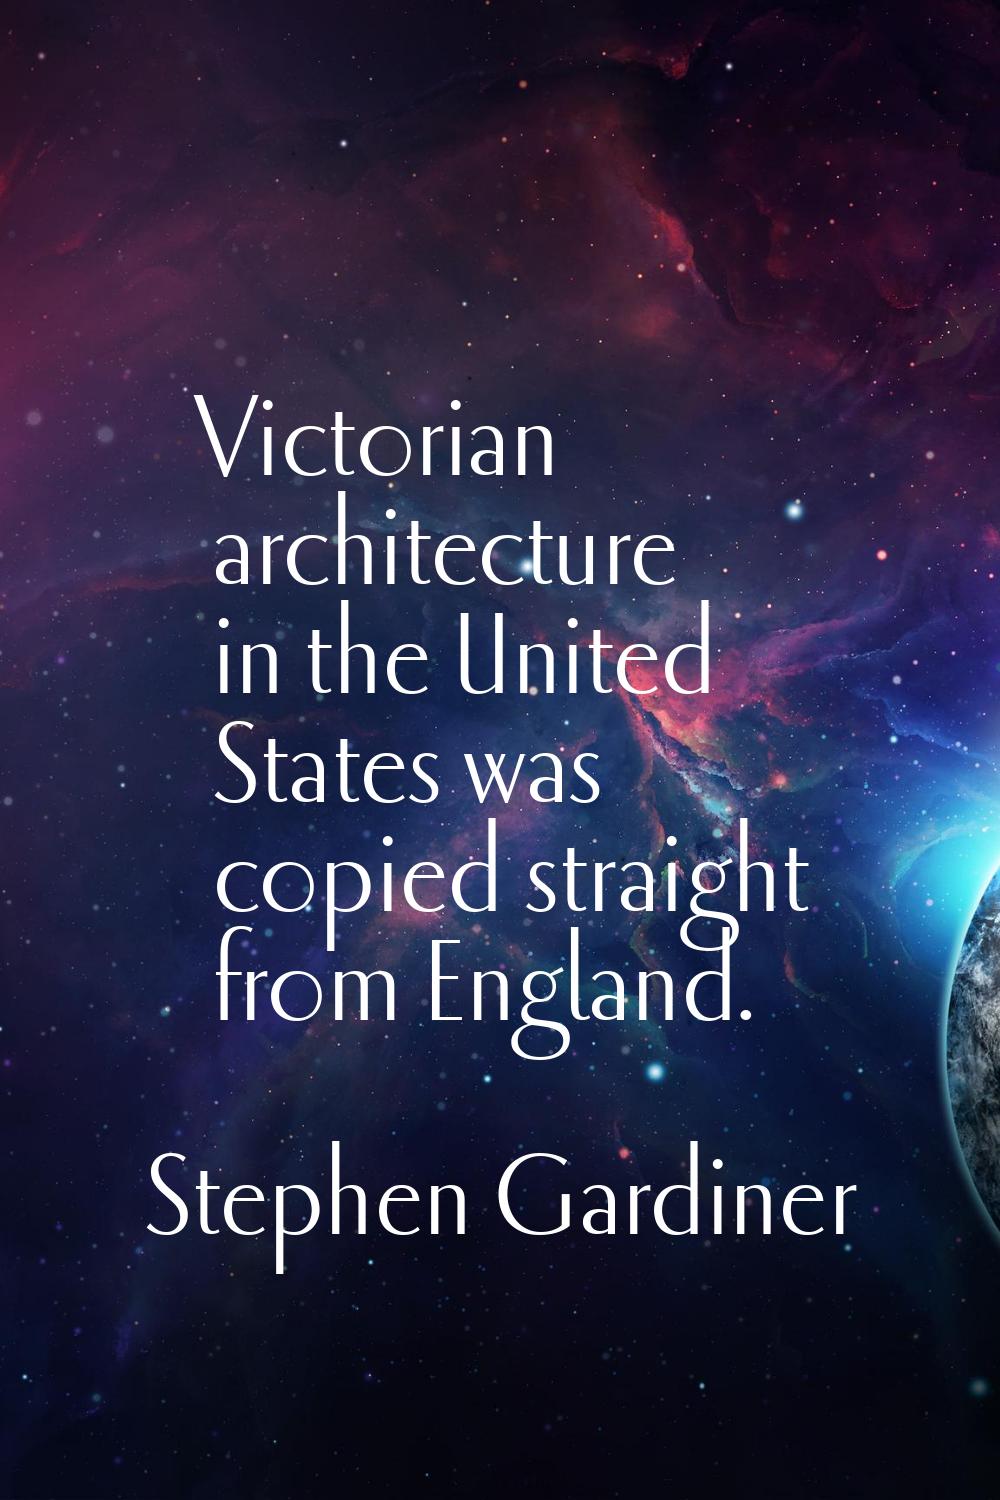 Victorian architecture in the United States was copied straight from England.